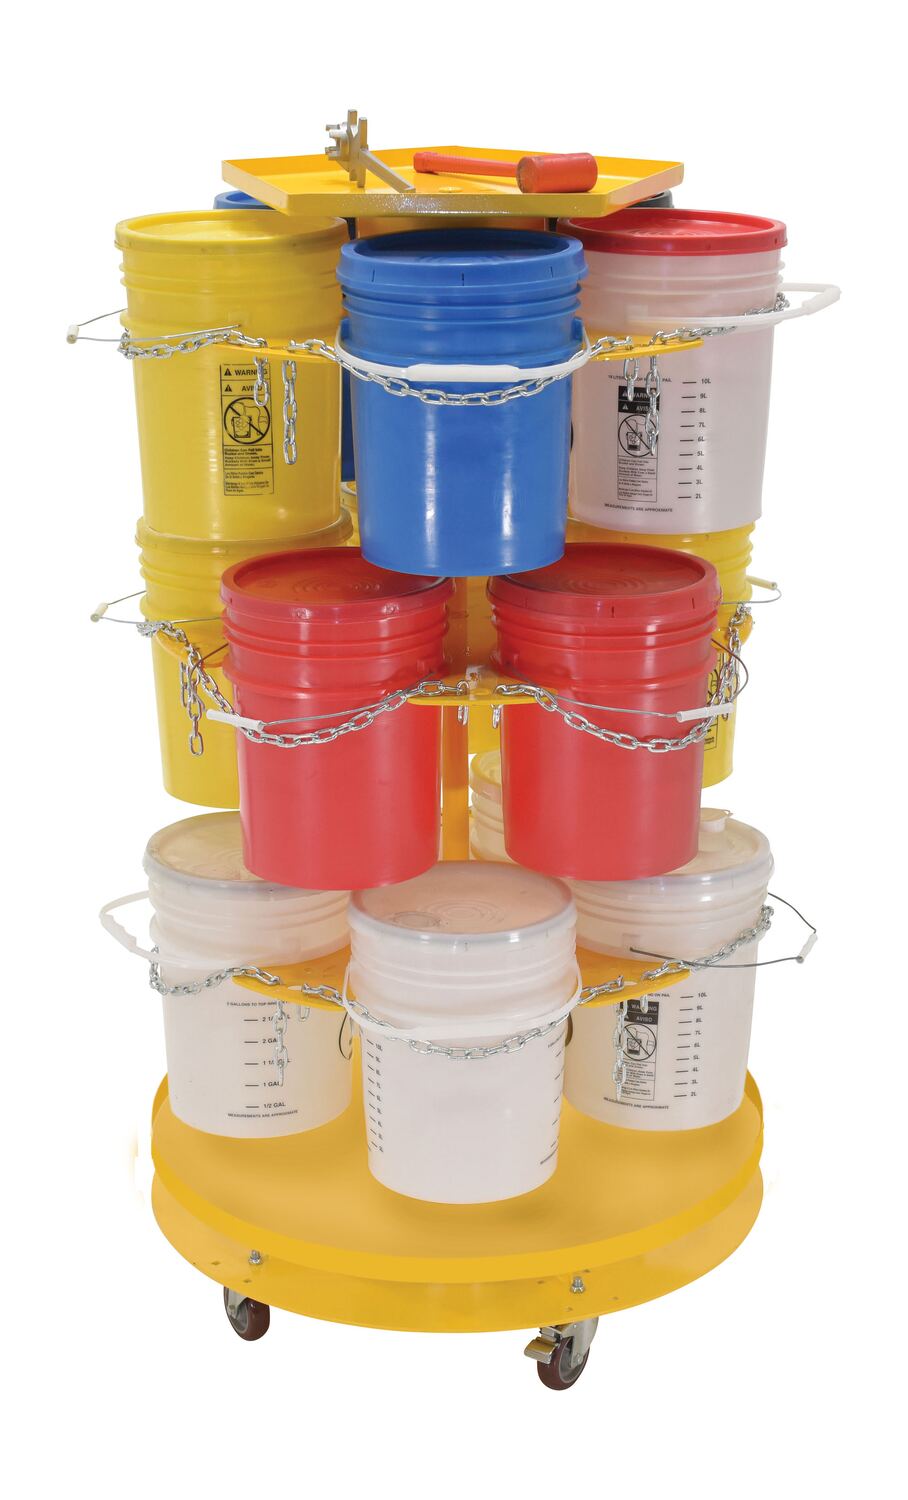 5 Gallon Bucket or Pail Seat Free Shipping